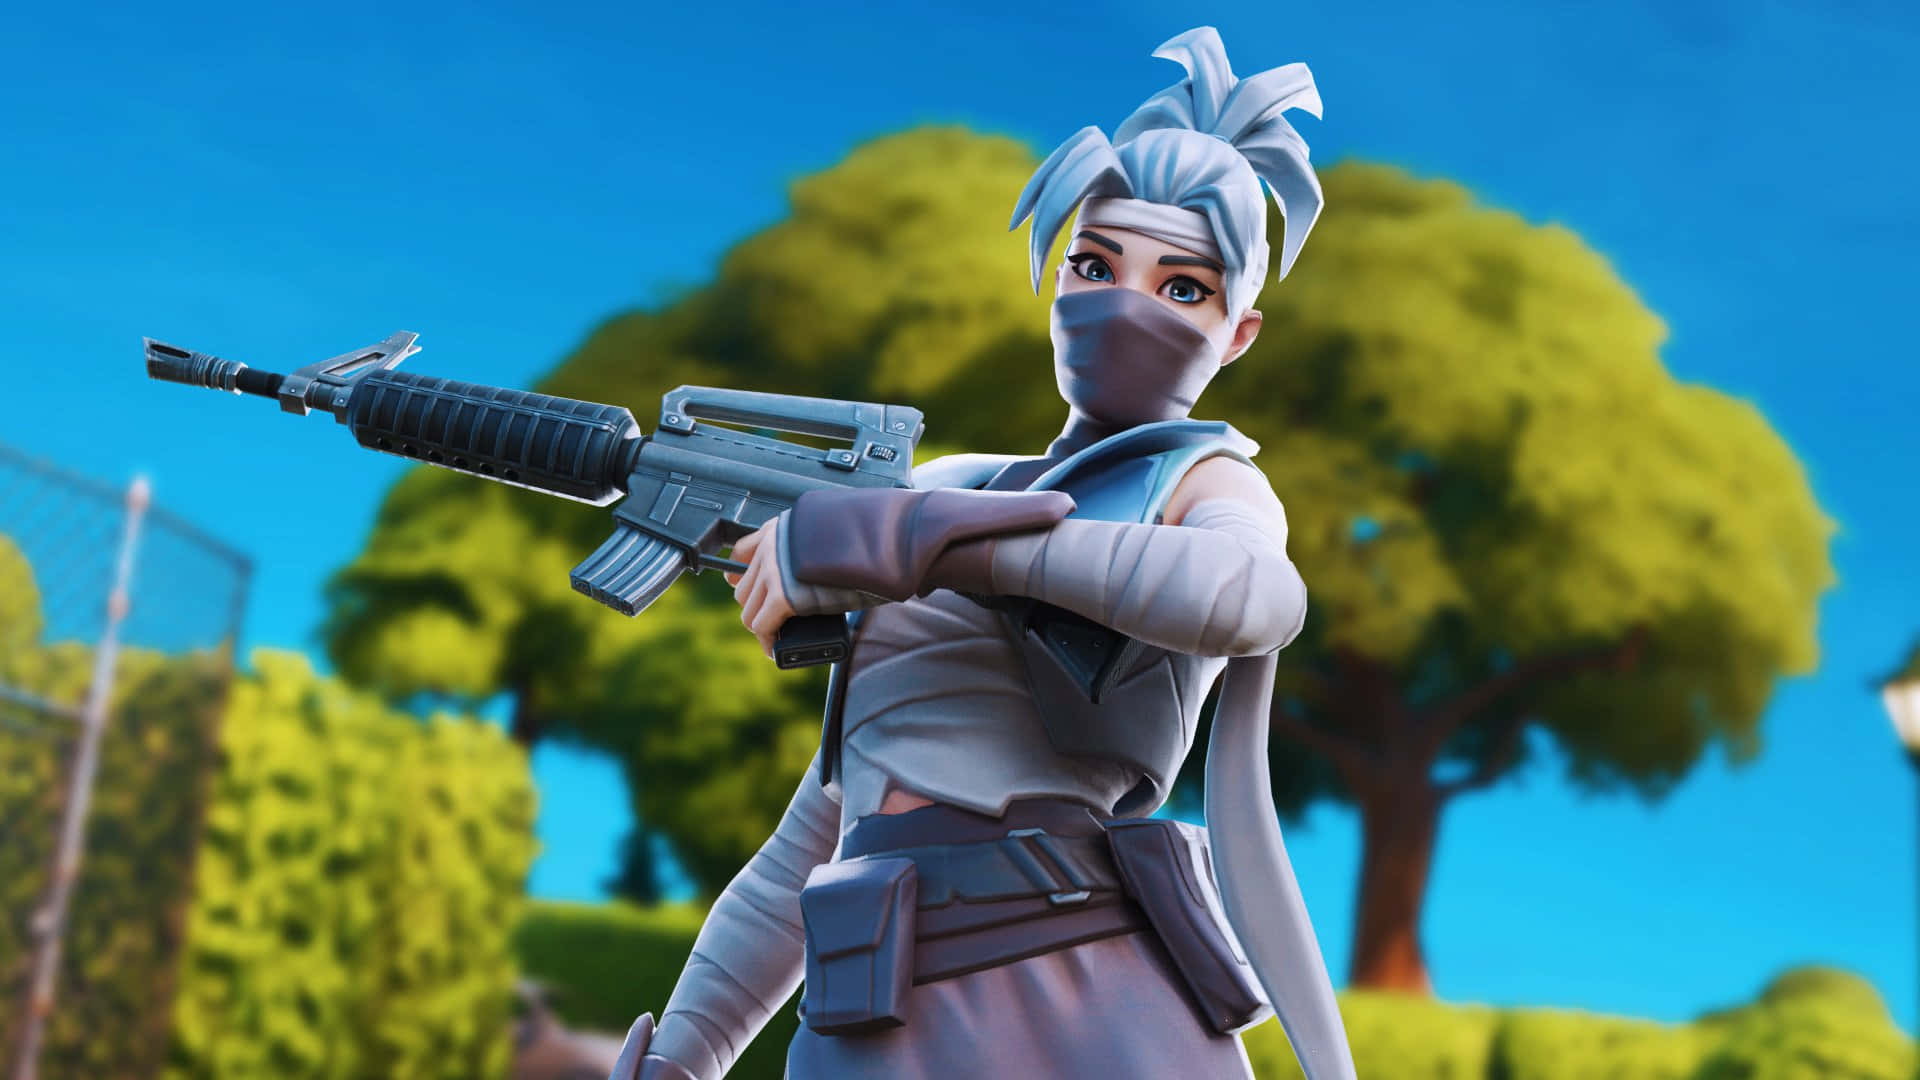 Master your way around the Island with Kuno, the Fortnite Outfit Wallpaper